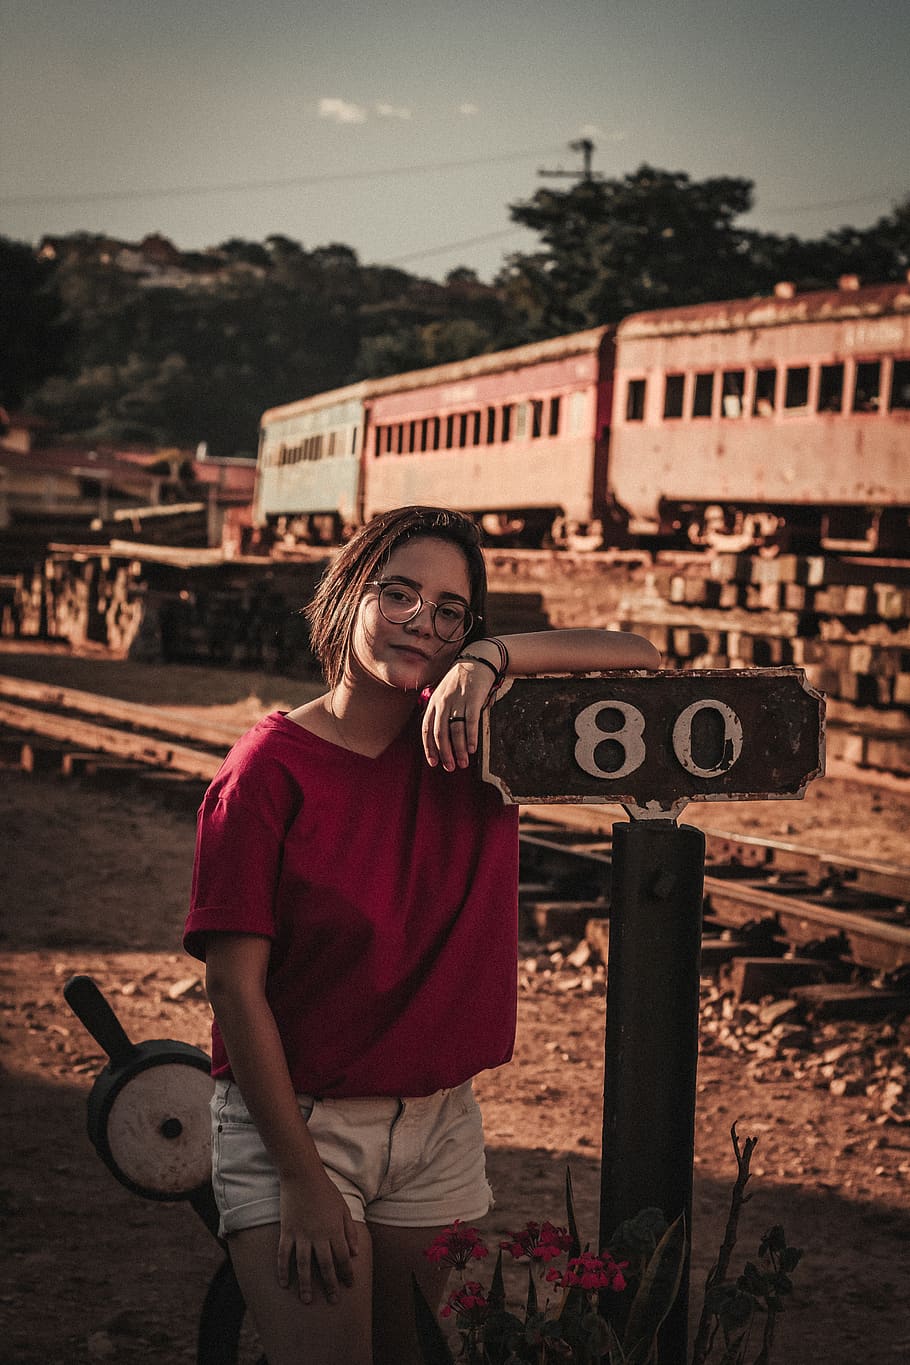 Standing Woman Wearing Red T-shirt Leaning on Brown Wooden 80 Post